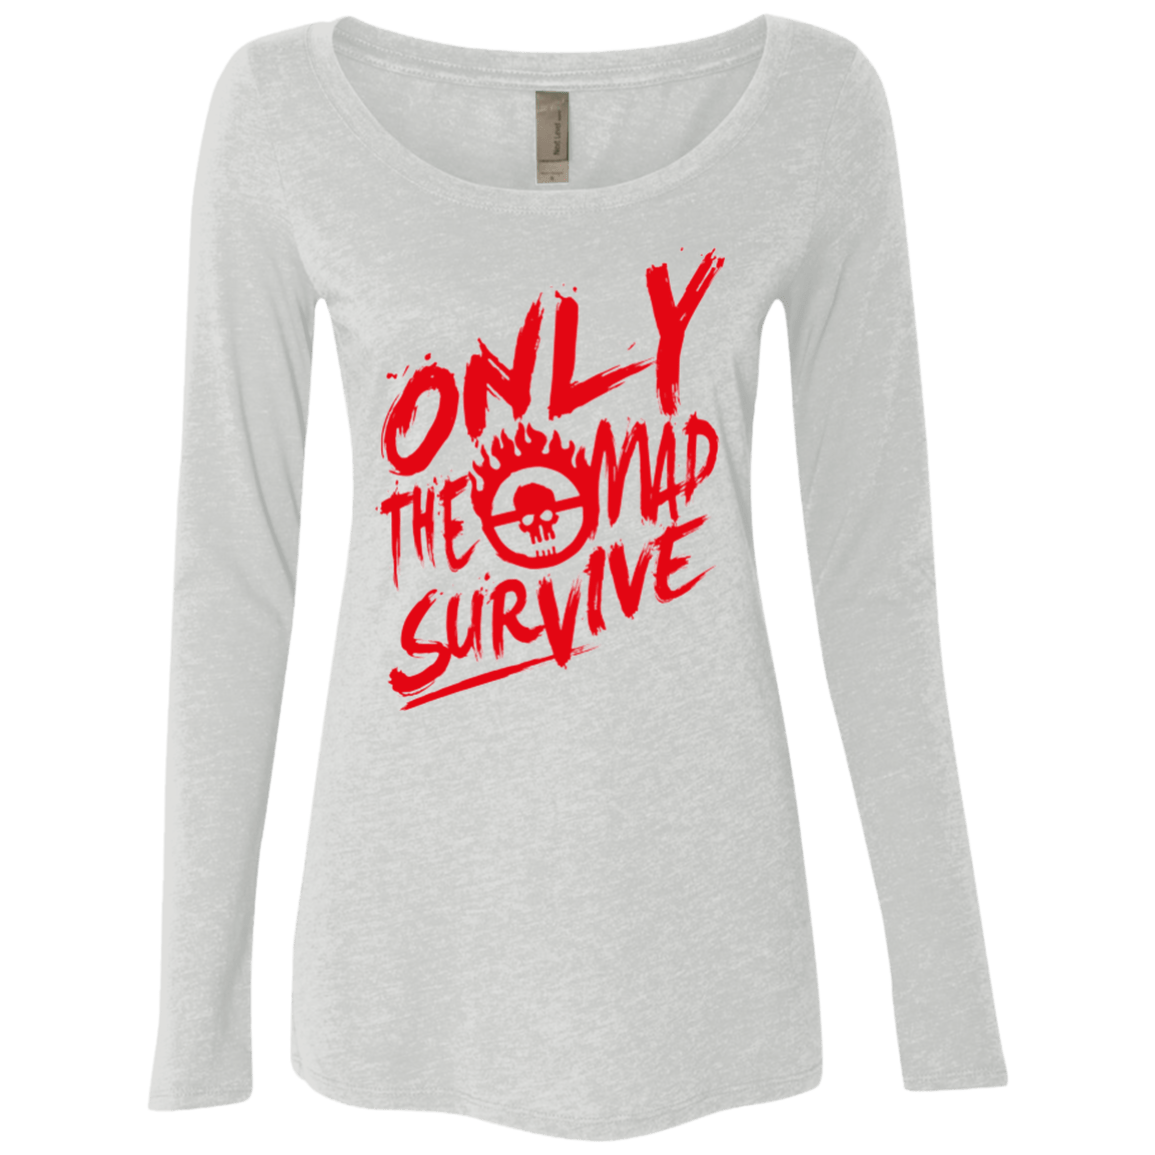 T-Shirts Heather White / Small Only The Mad Red Women's Triblend Long Sleeve Shirt